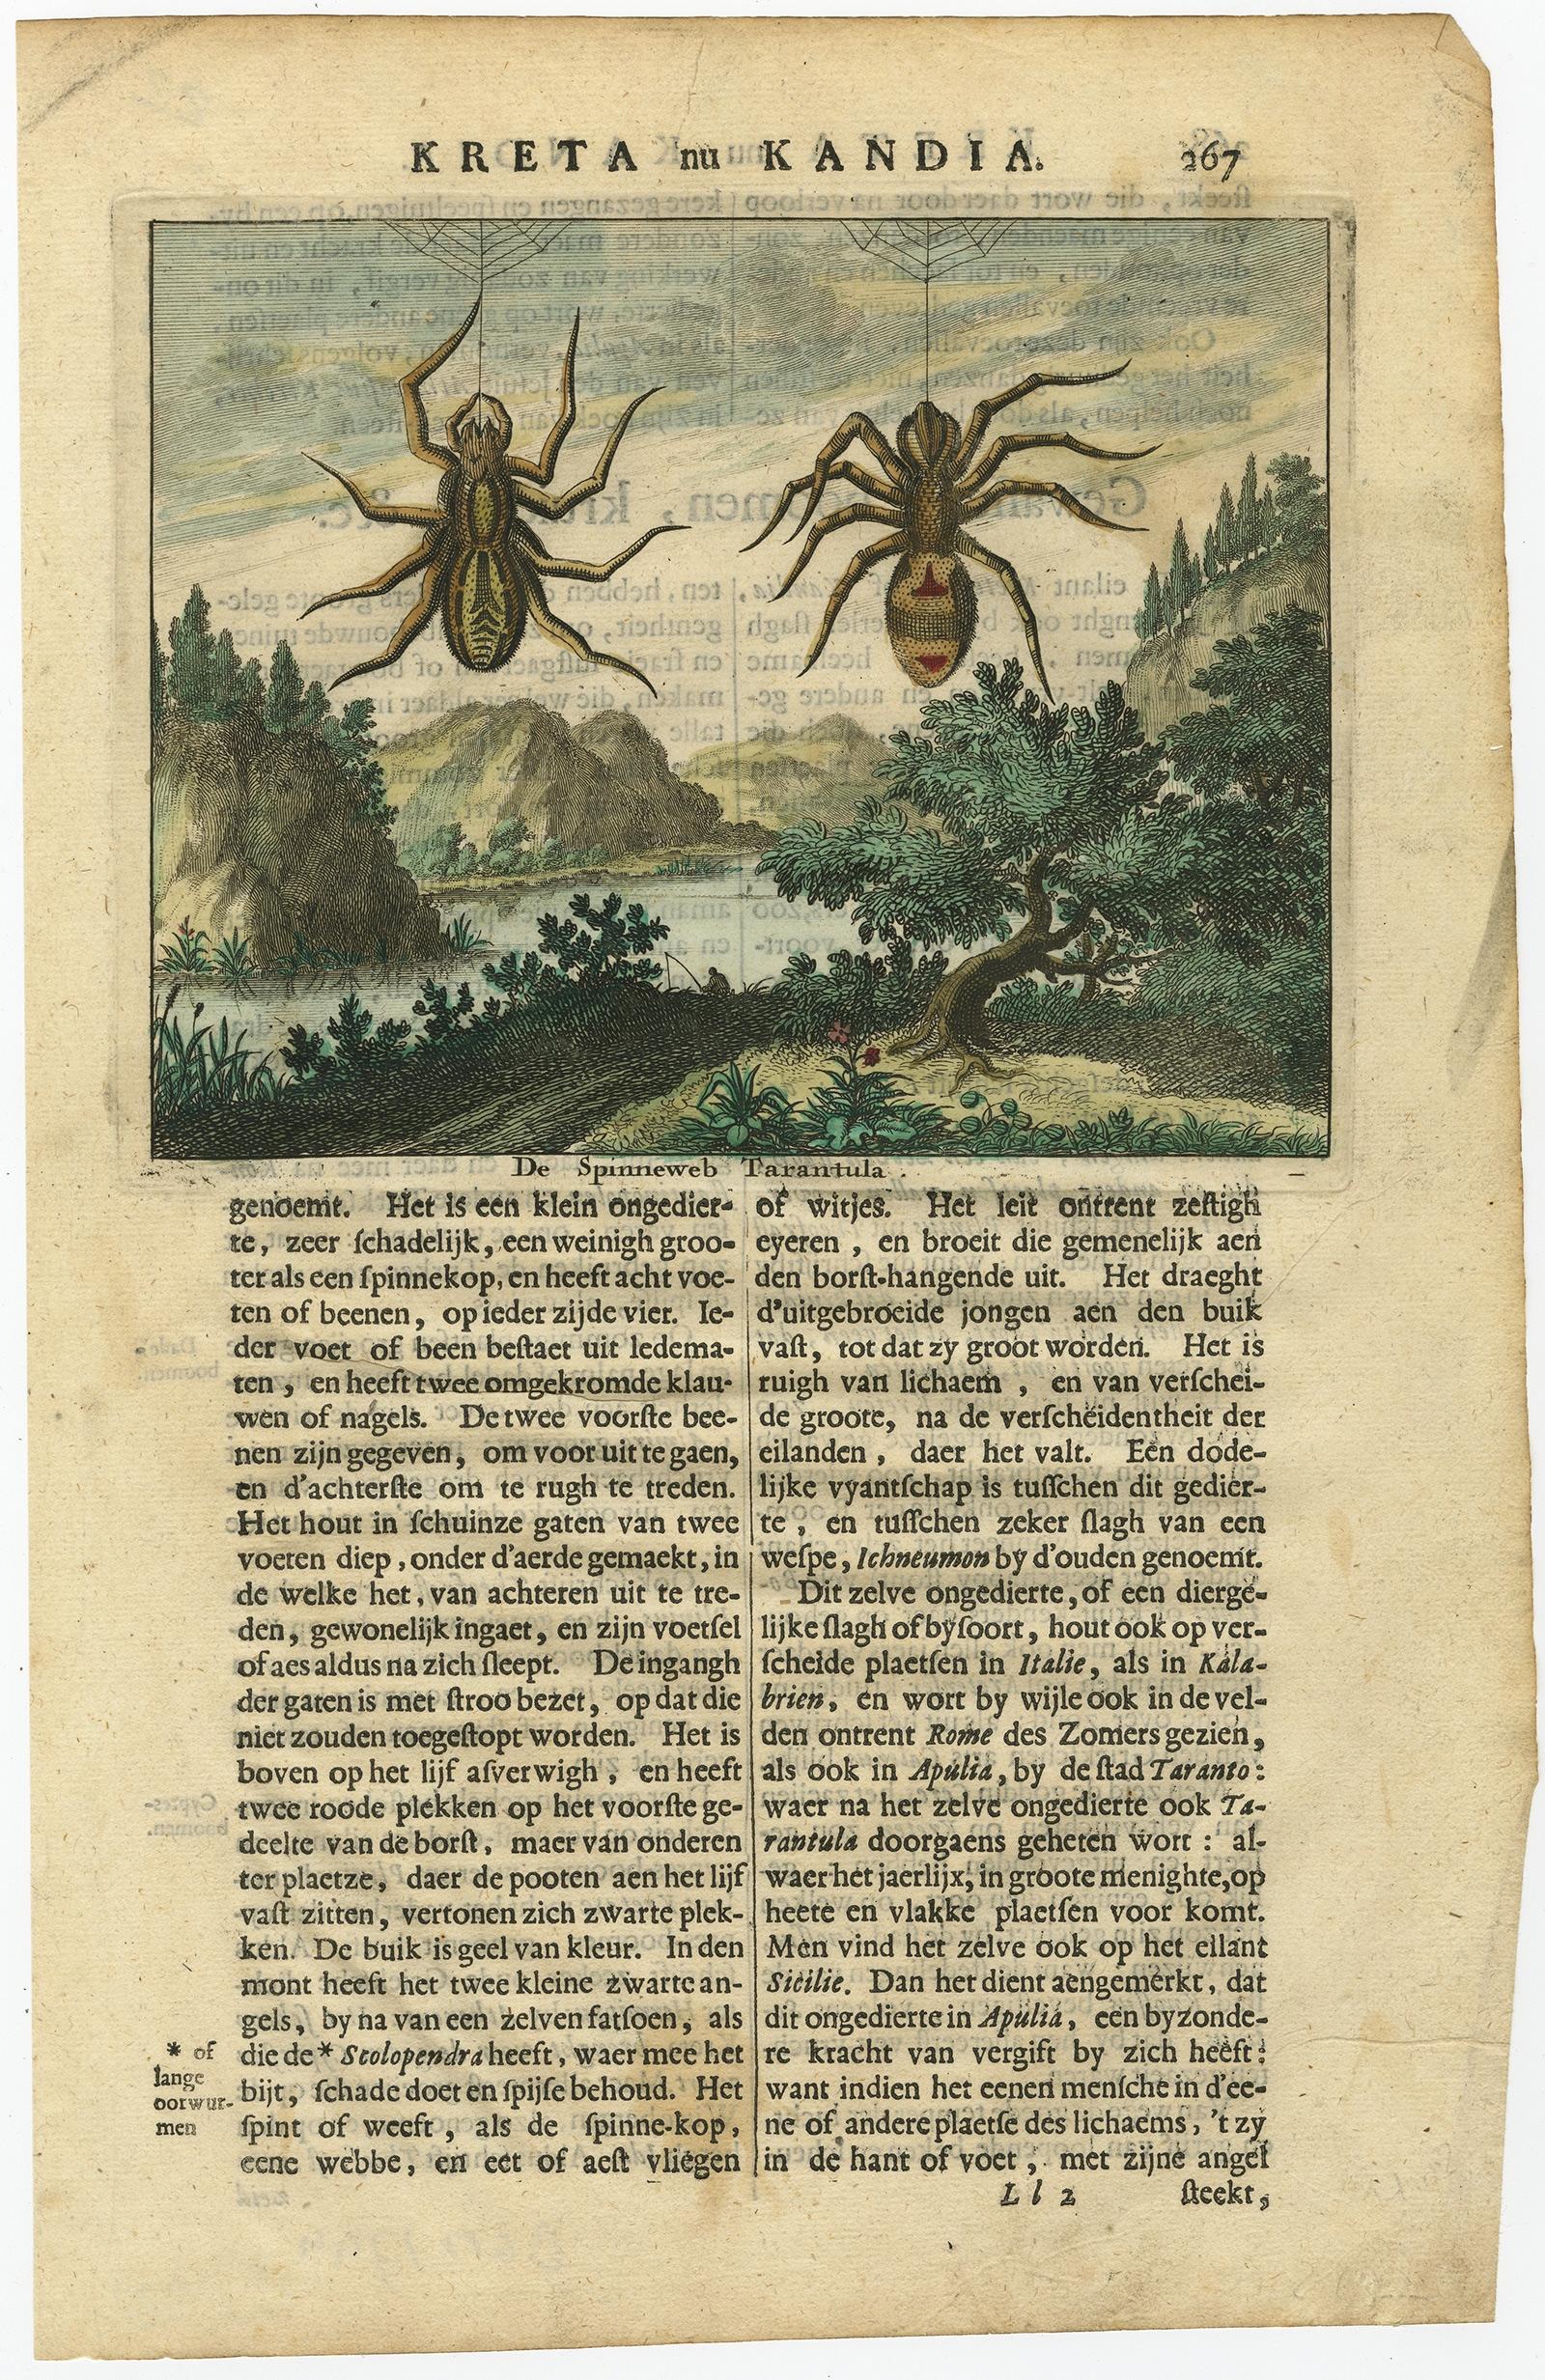 Antique print, titled: 'De Spinneweb Tarantula.' - This original antique print shows spiders of Crete. Dutch text on verso. Source unknown, to be determined.

Artists and Engravers: Olfert Dapper (c. 1635 - 1689) was a Dutch physician and writer.